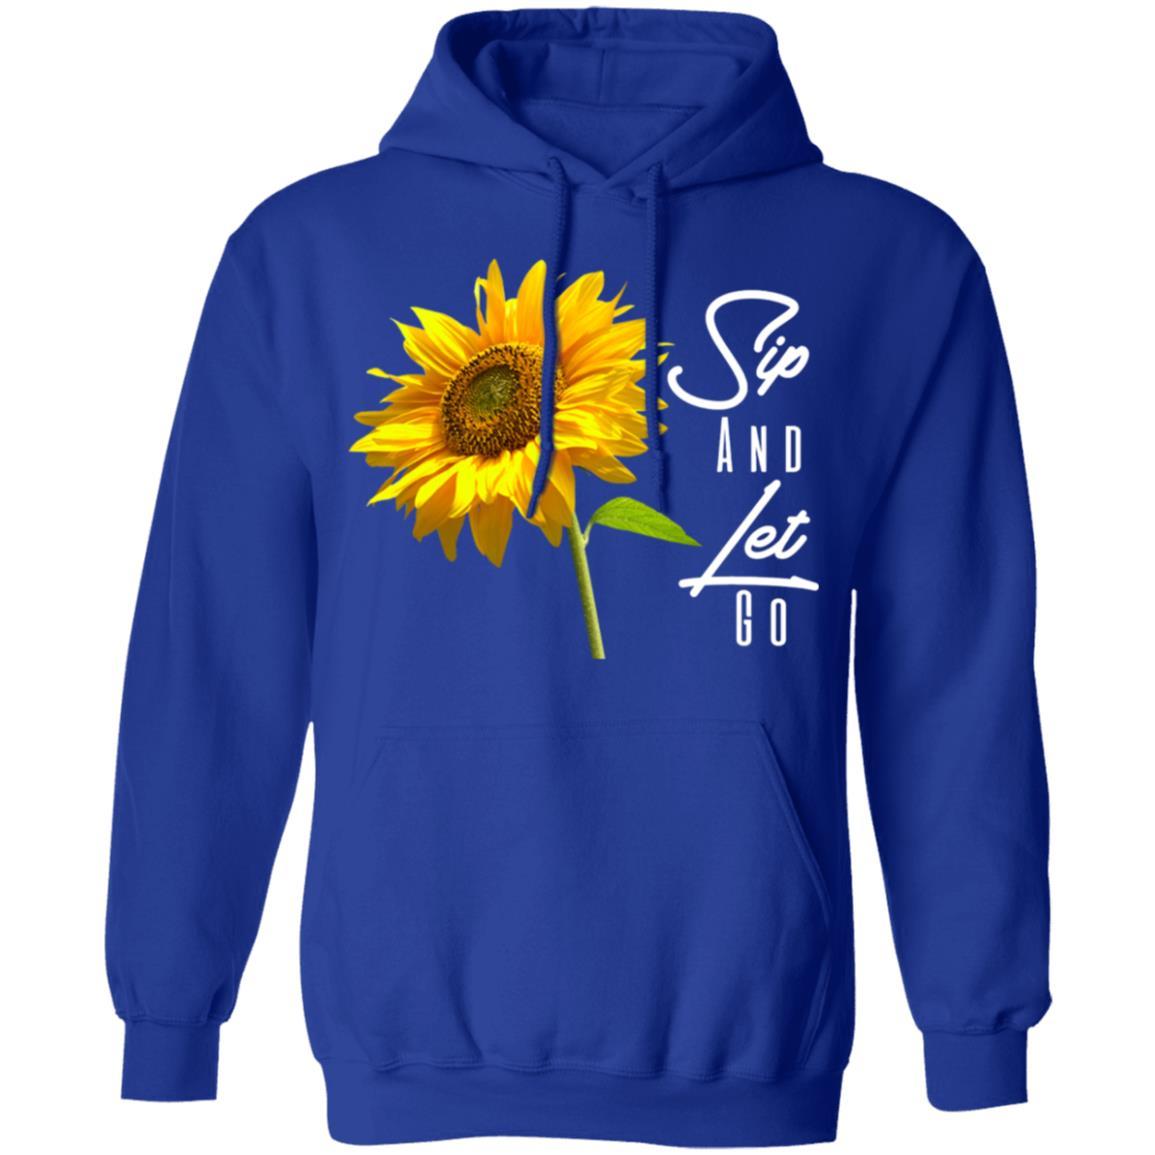 Sip And Let Go Pullover Hoodie - Blue - Loyalty Vibes